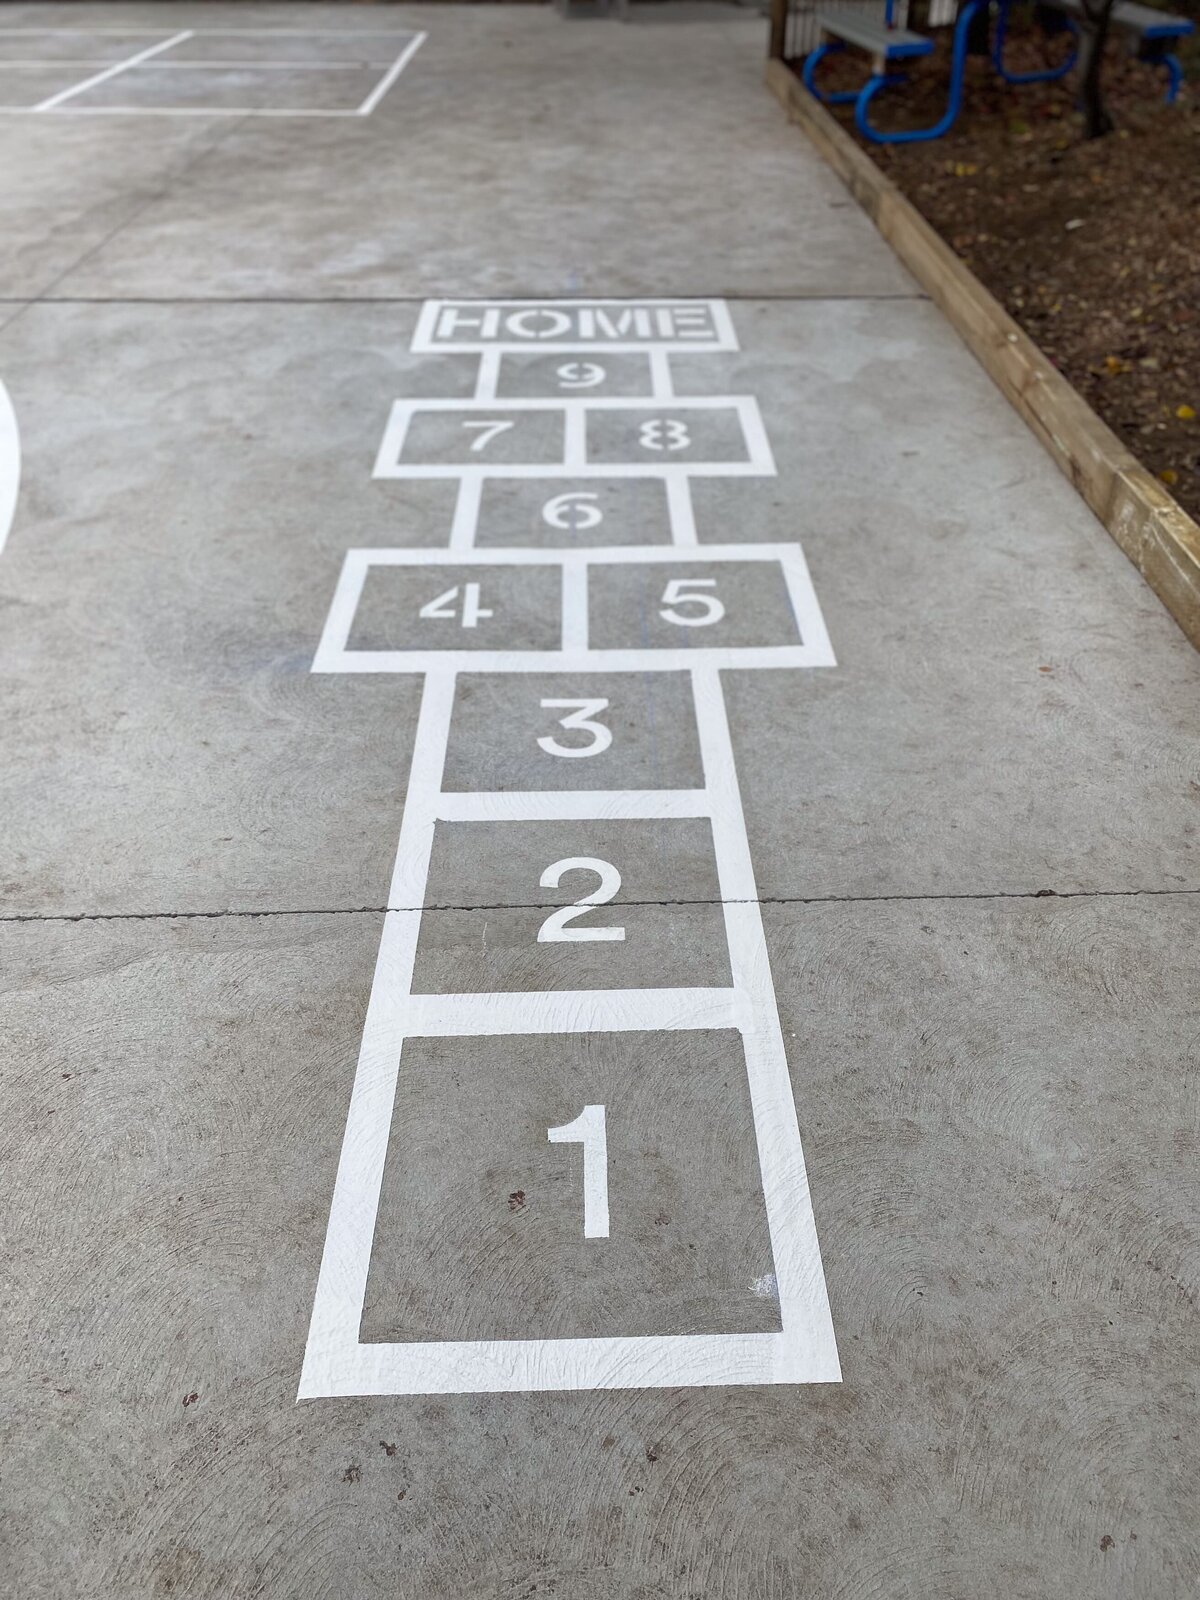 Linemarking in a kids school playground of a hopscotch